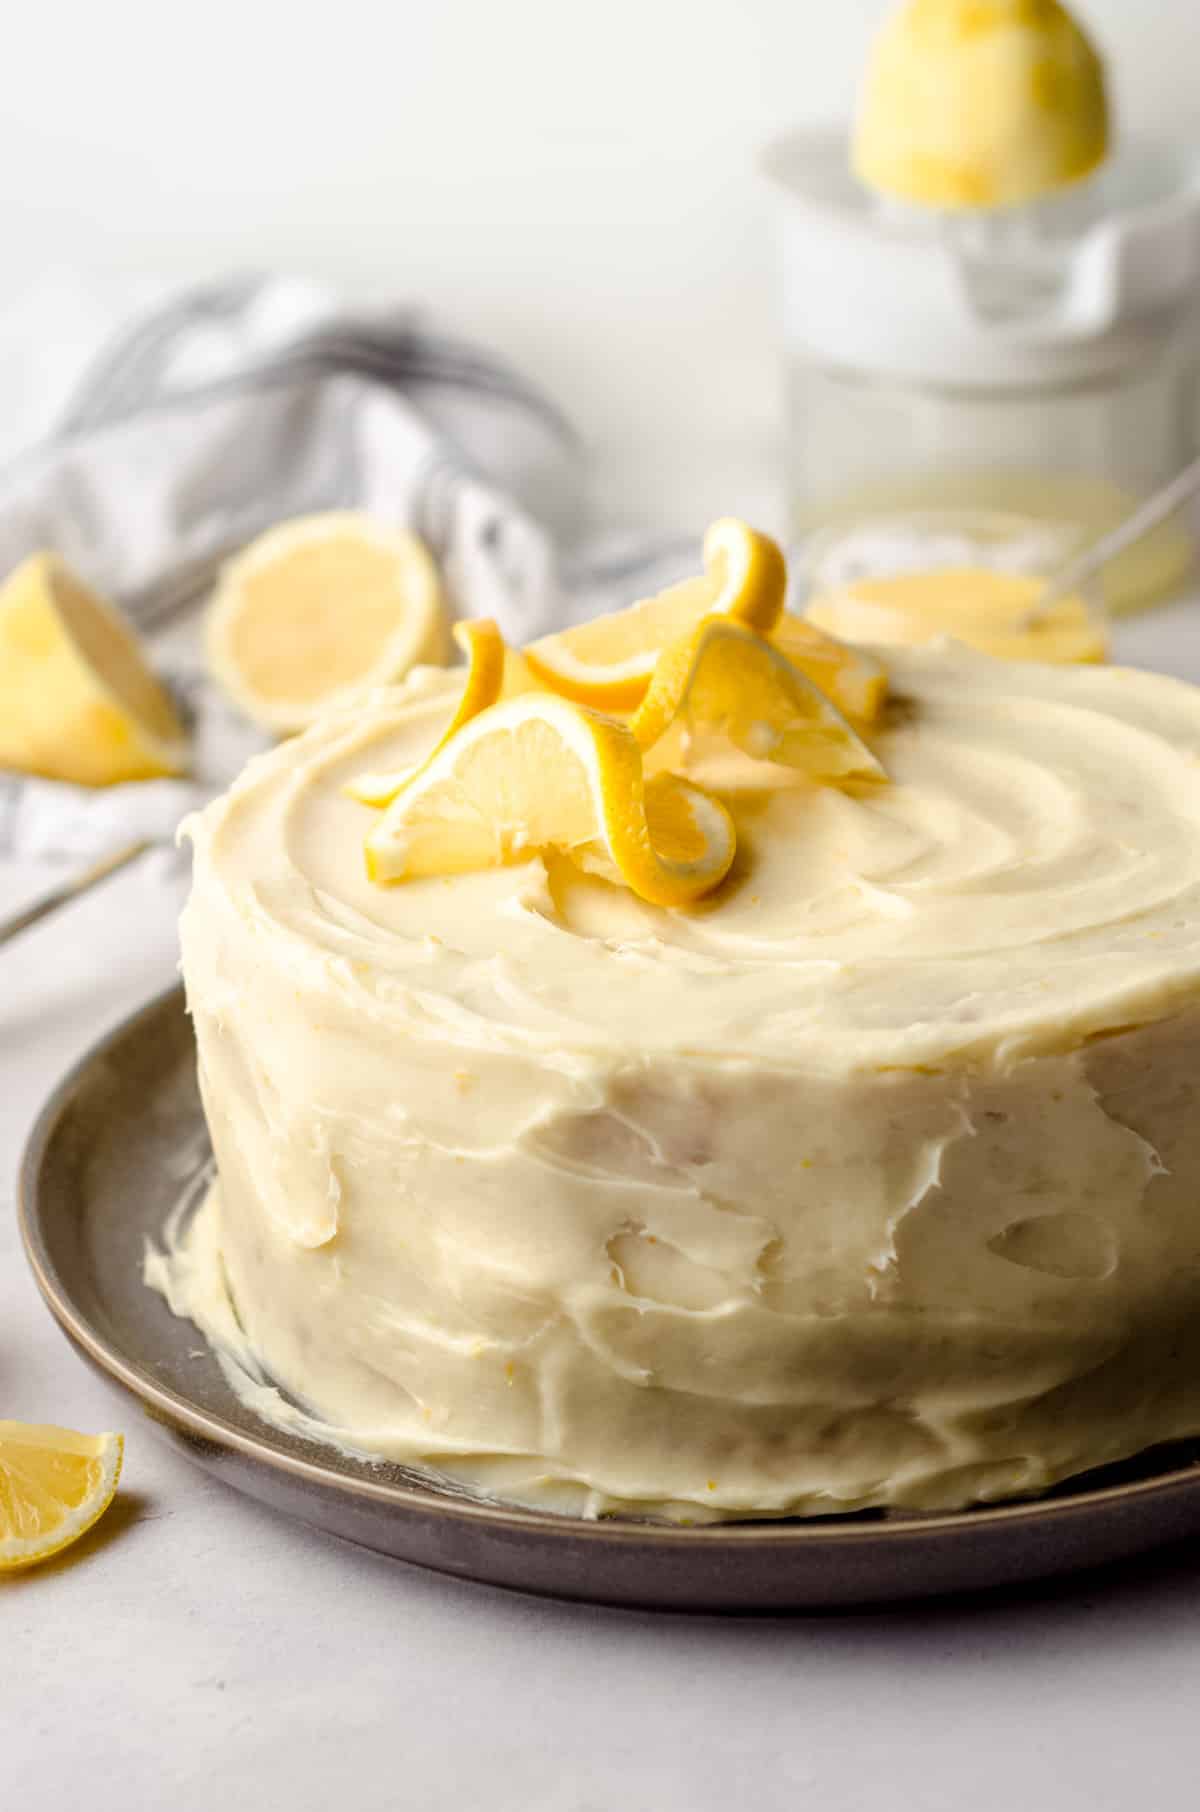 A lemon cake, topped with lemon frosting and lemon slices.